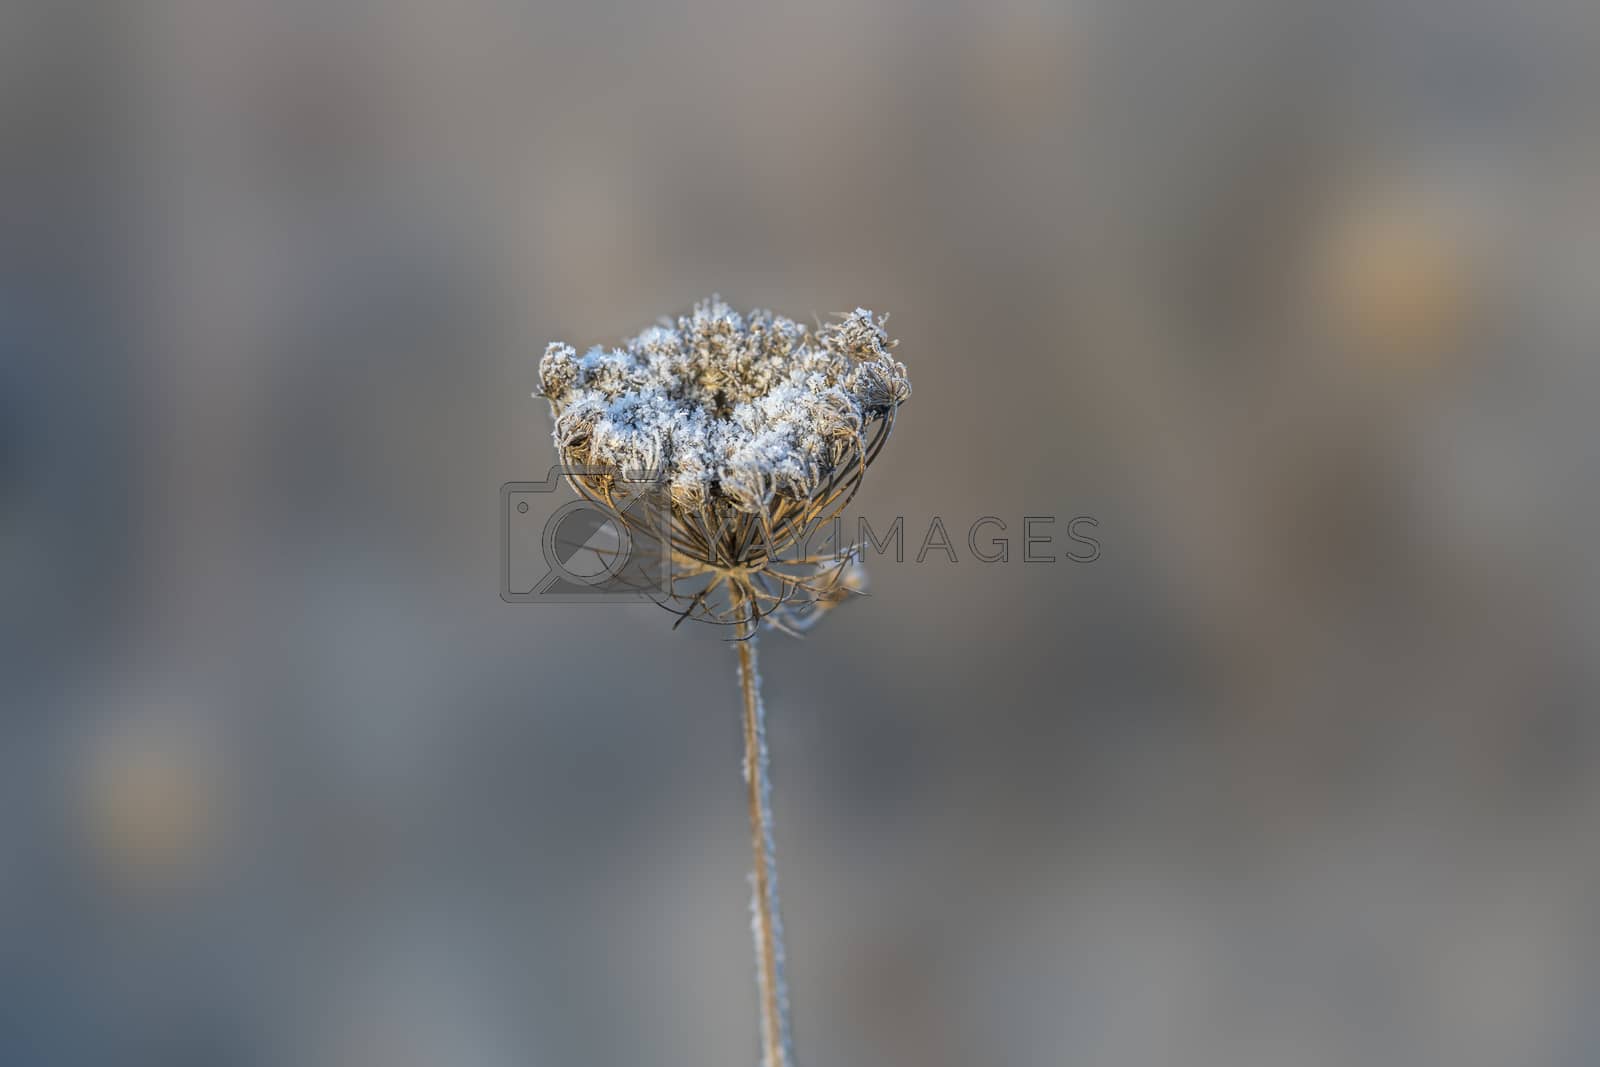 Royalty free image of frozen fauna plants with hoar frost  by mario_plechaty_photography